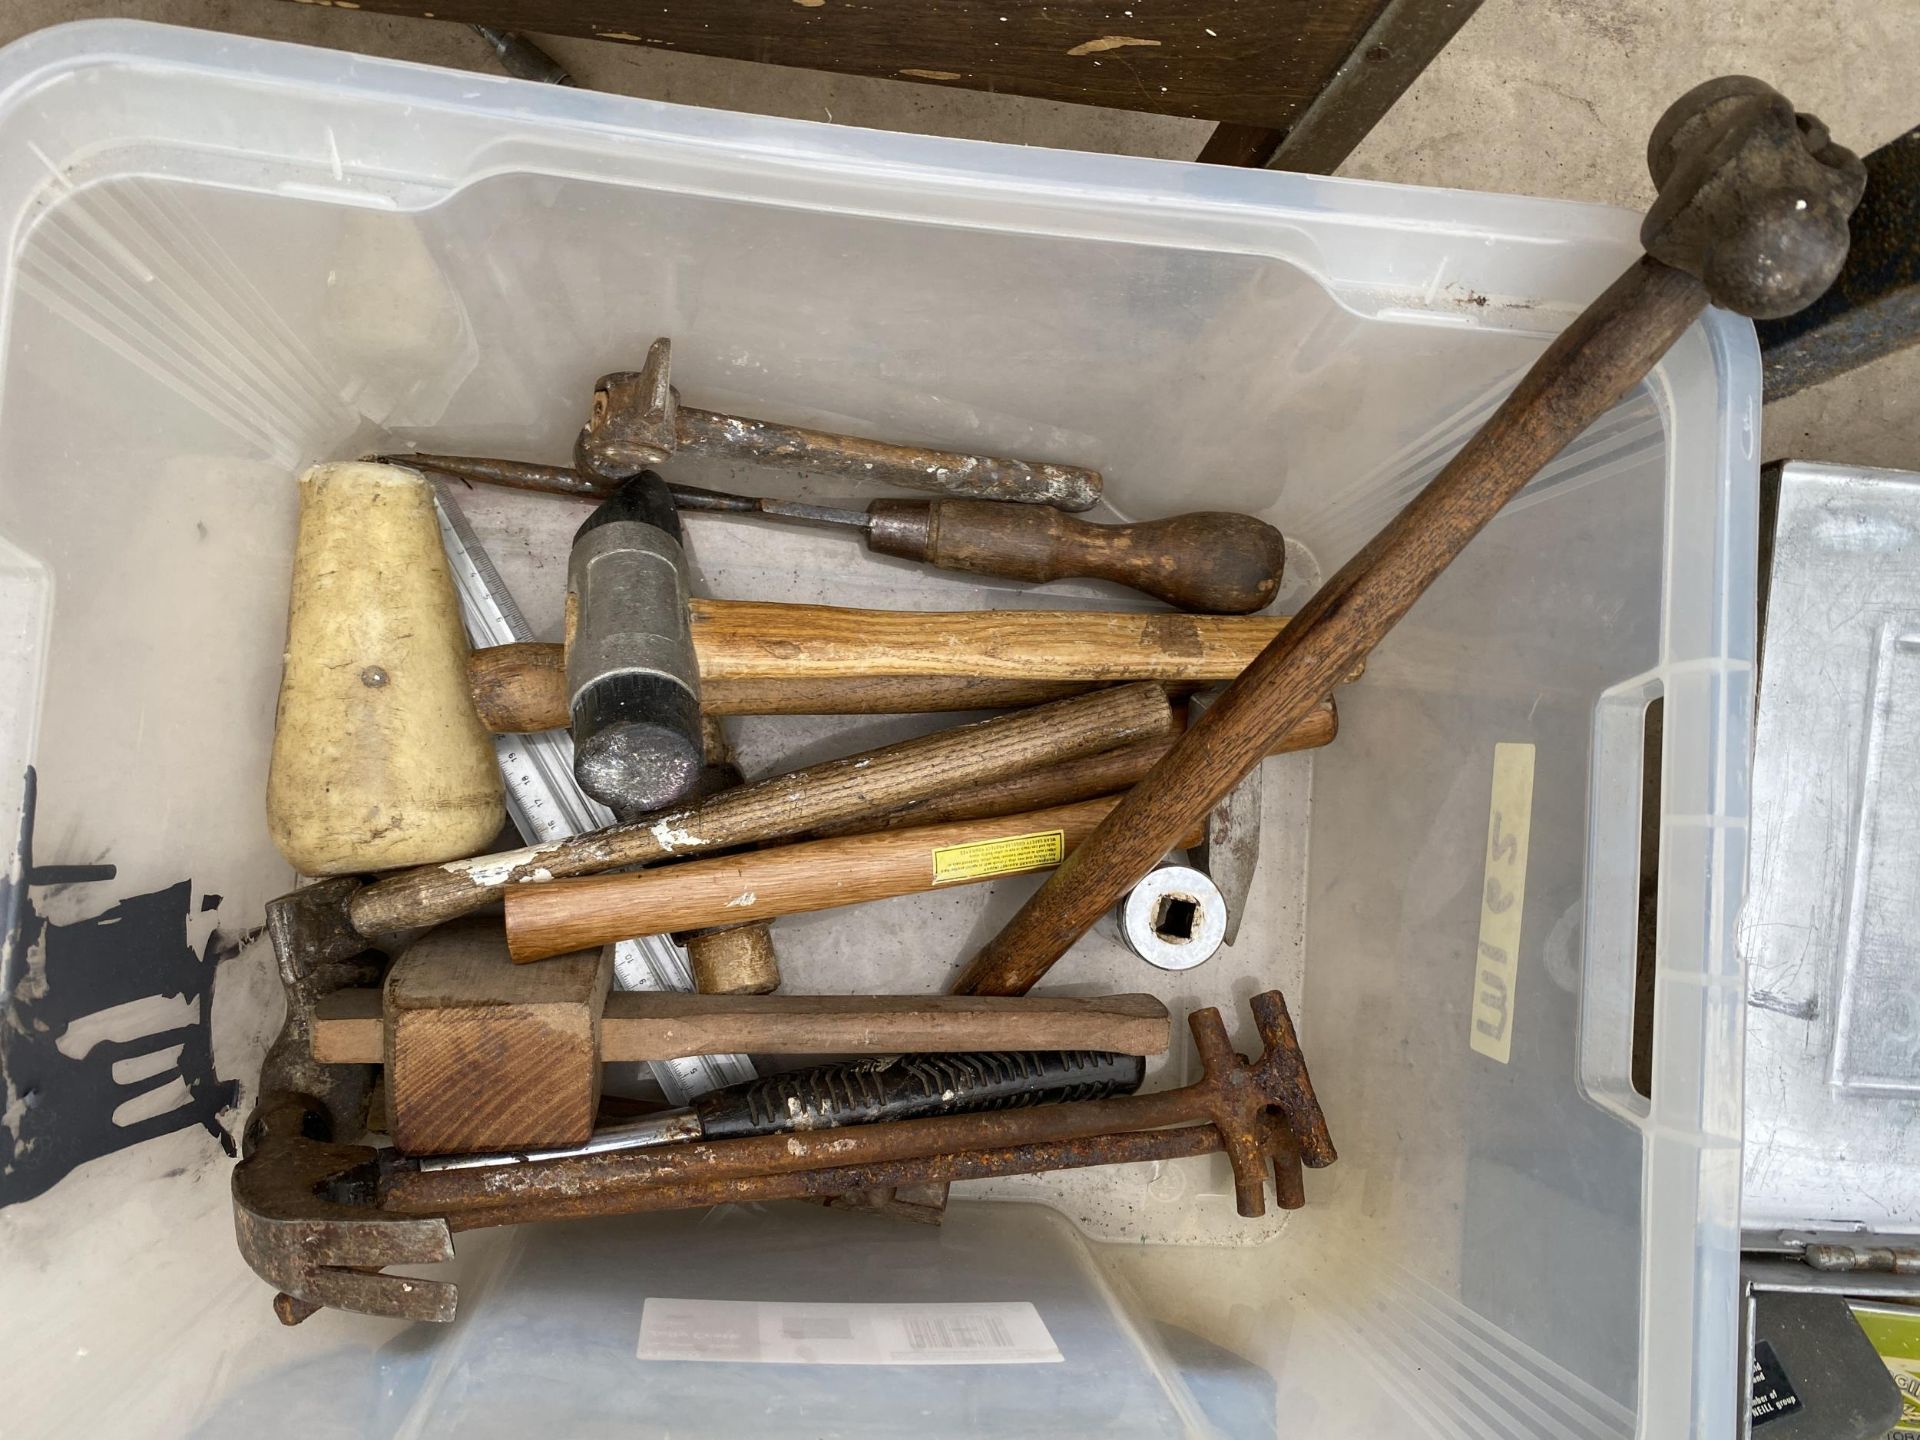 AN ASSORTMENT OF HAND TOOLS TO INCLUDE HAMMERS AND AN AXE ETC - Image 2 of 3